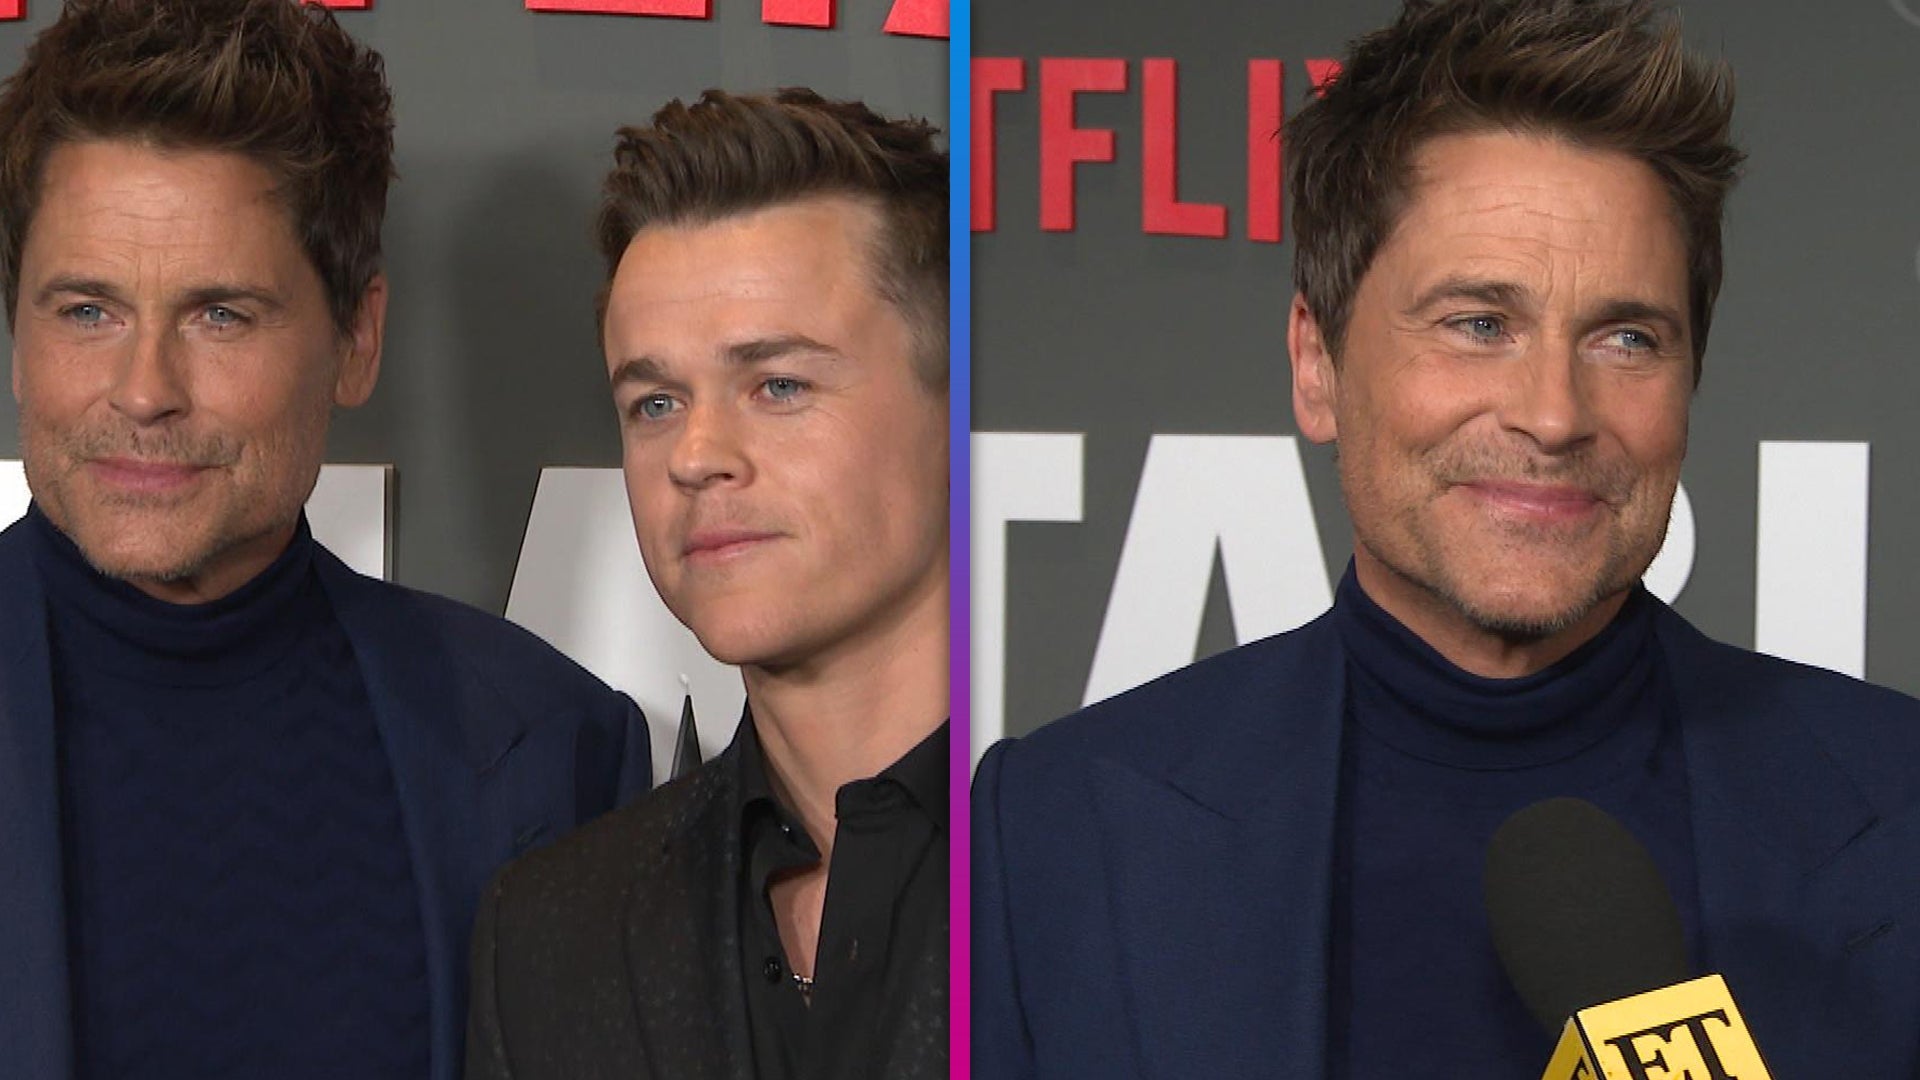 Unstable Teaser: Rob Lowe and His Son Discuss Father-Son Dynamics